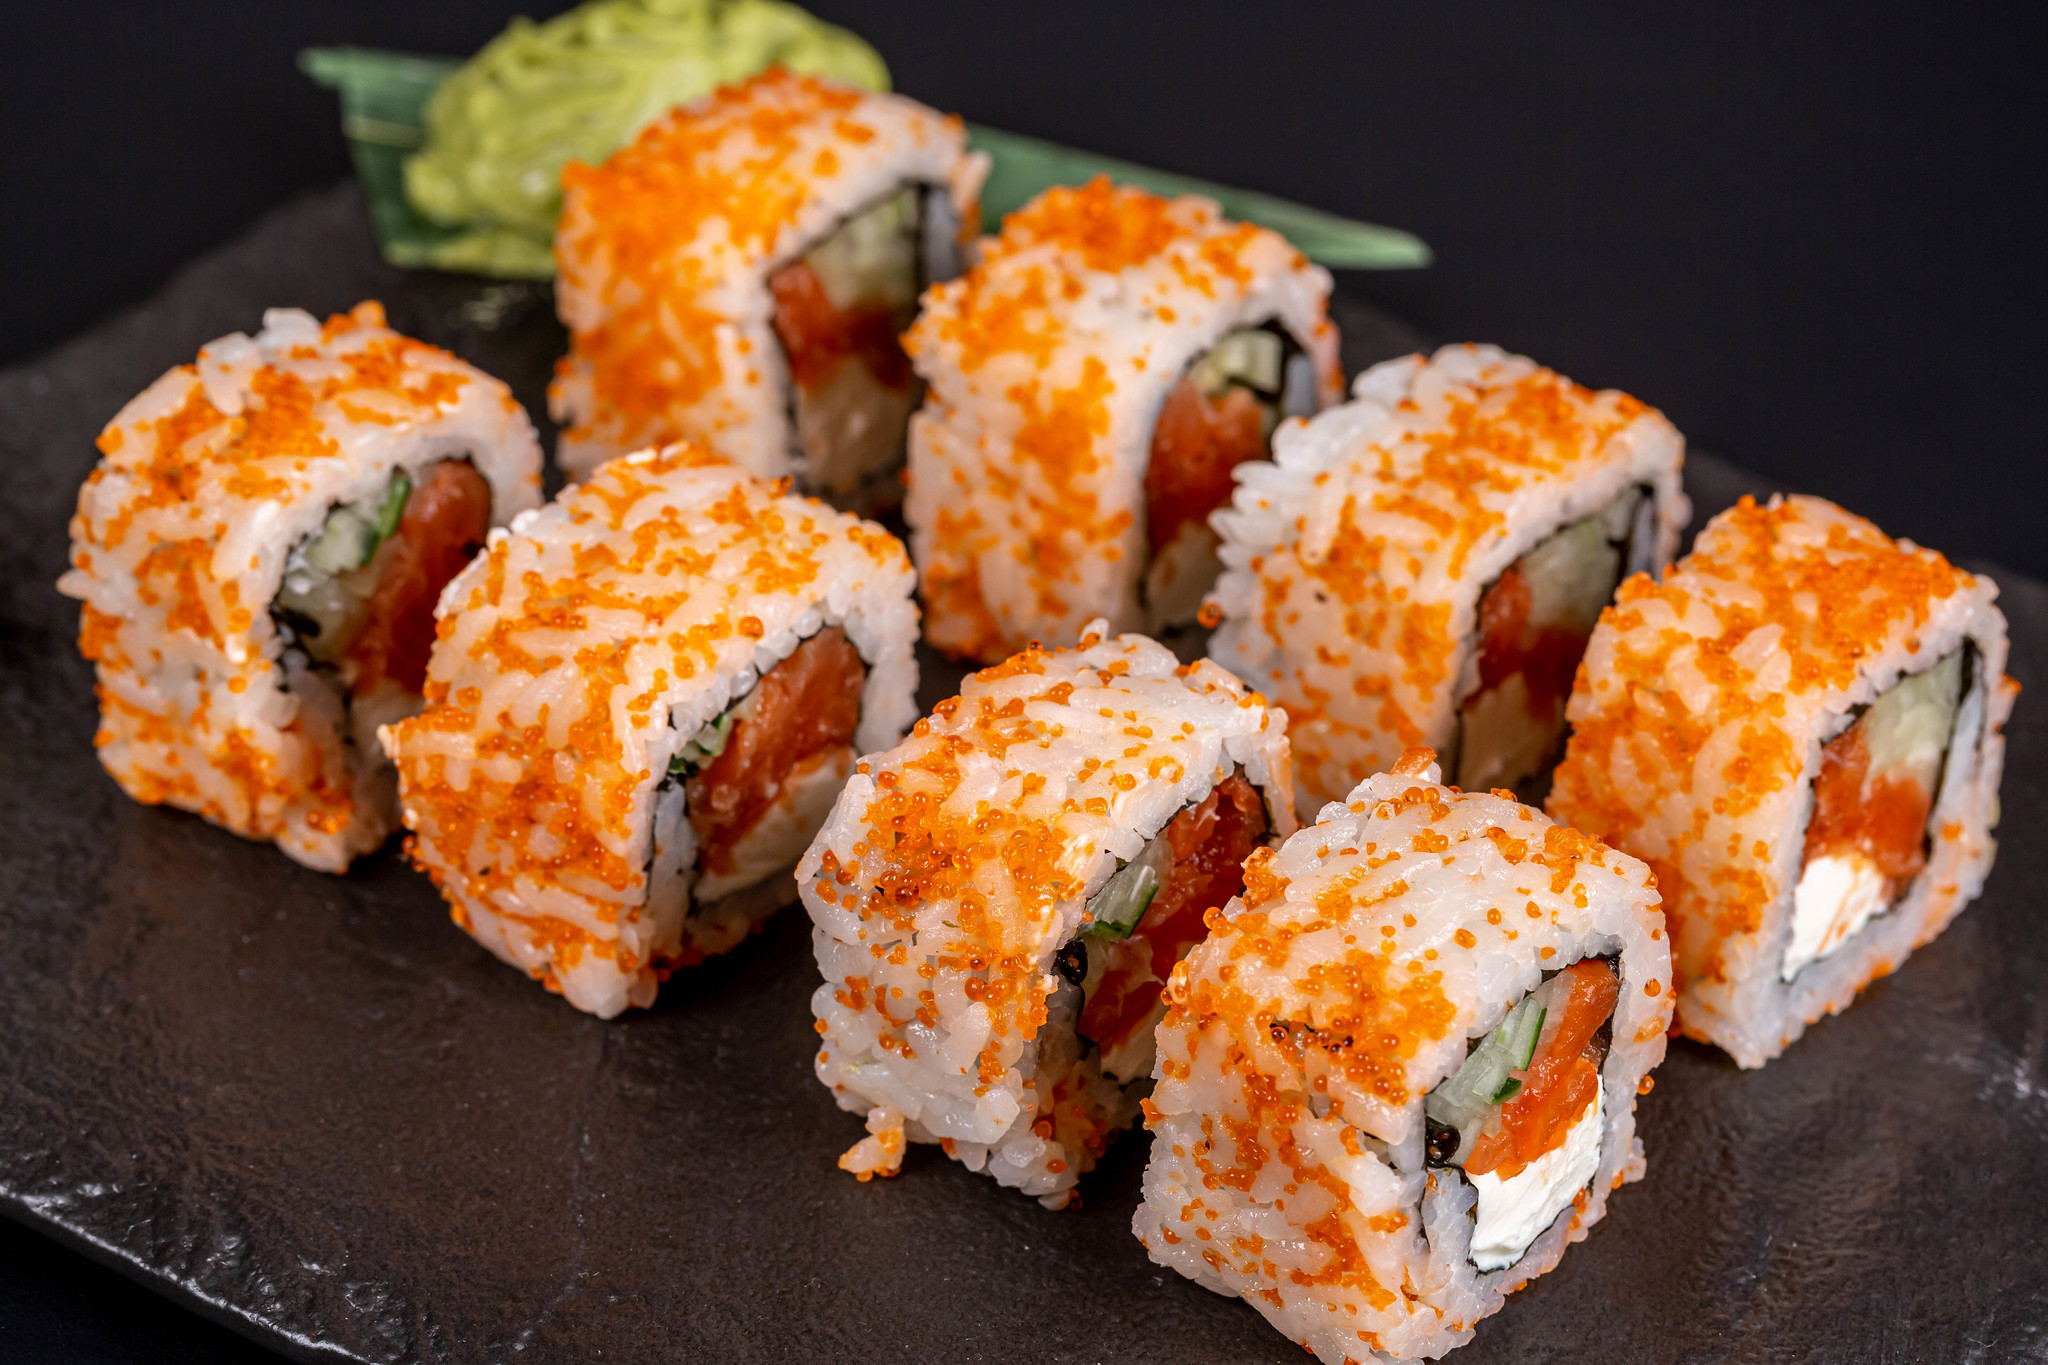 The Health Benefits Of Eating A California Roll